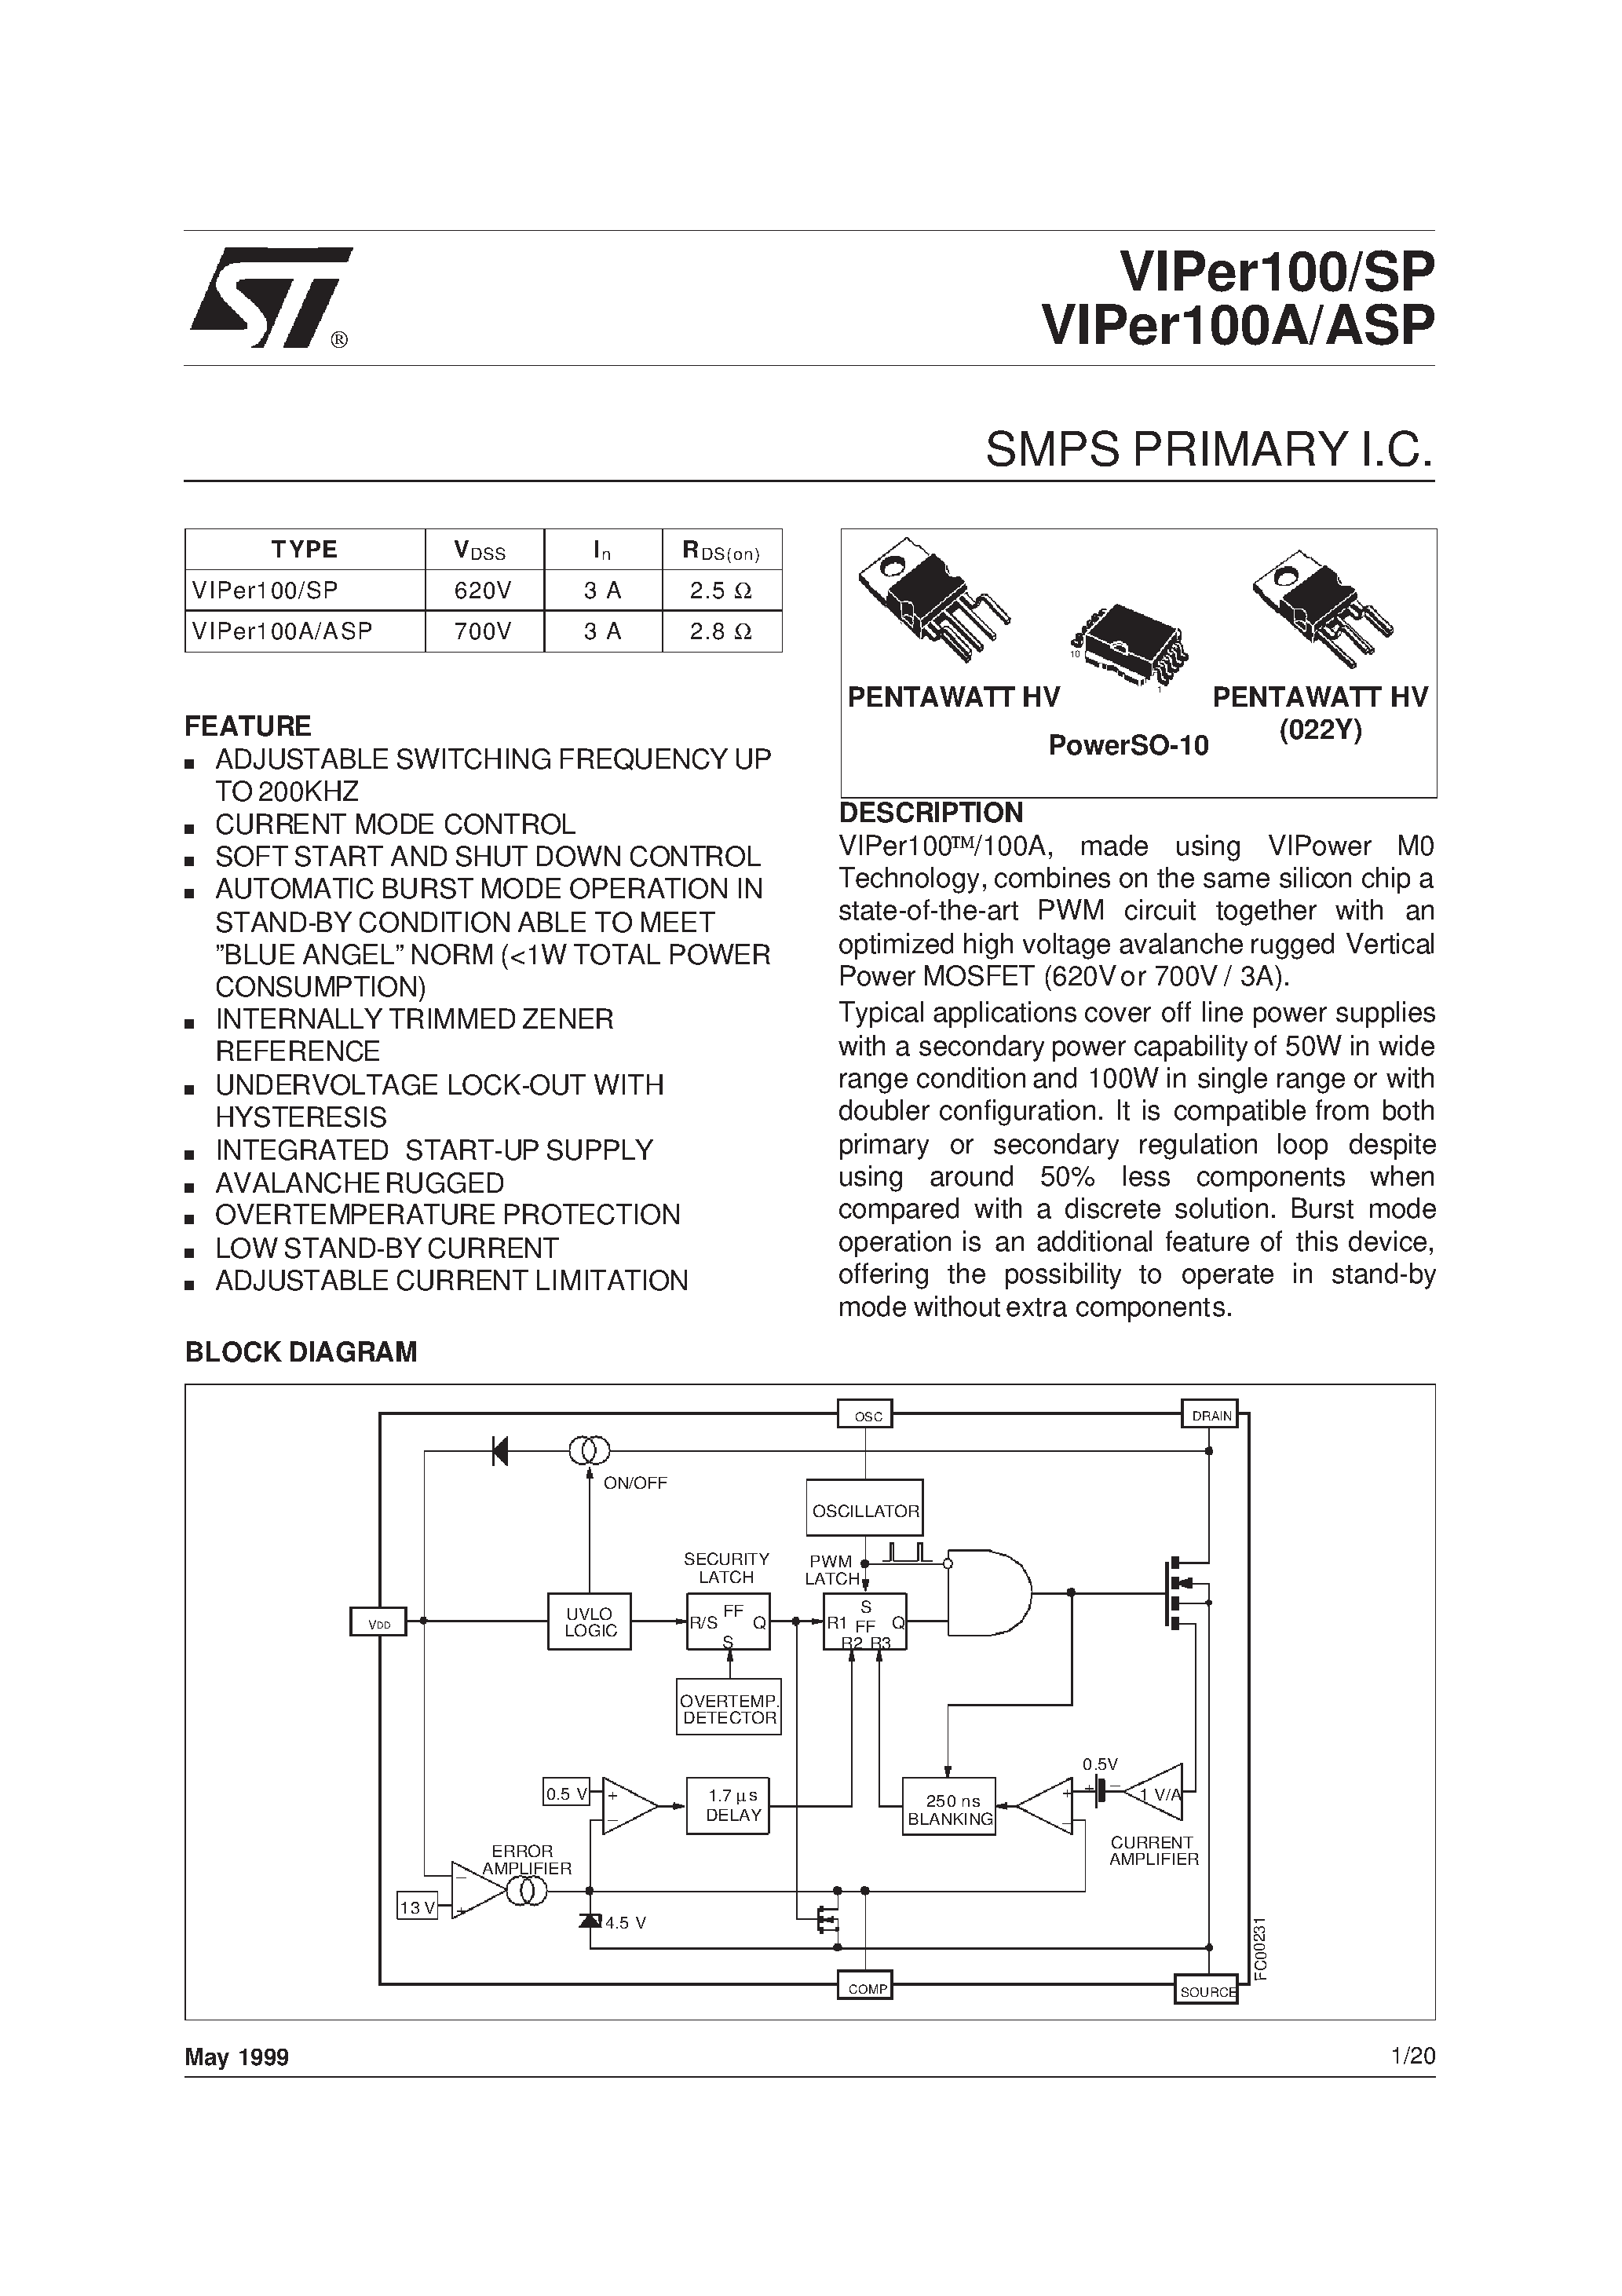 Datasheet VIPer100A - SMPS PRIMARY I.C. page 1